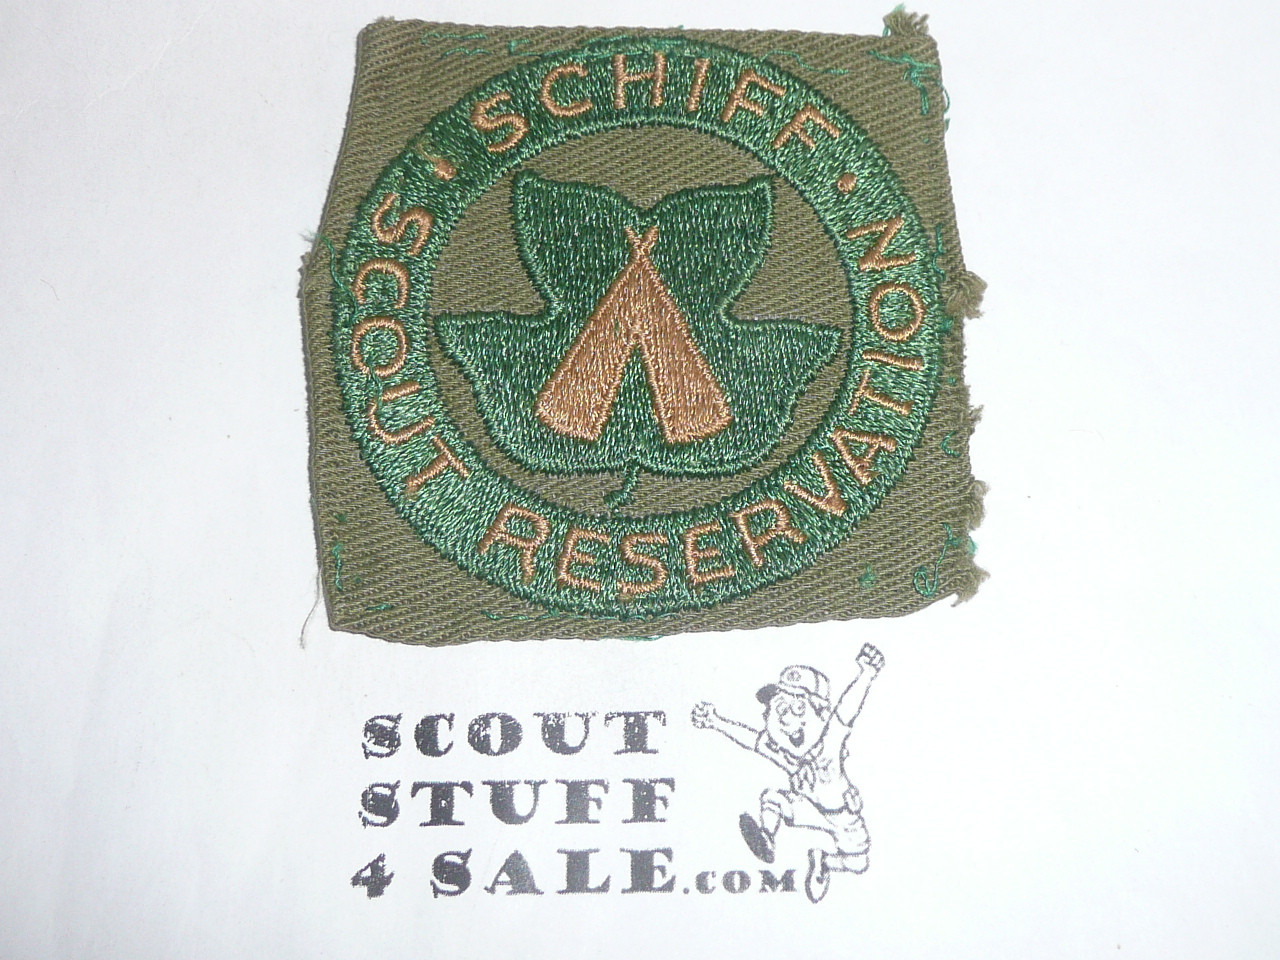 Schiff Scout Reservation, Square Twill Patch, used